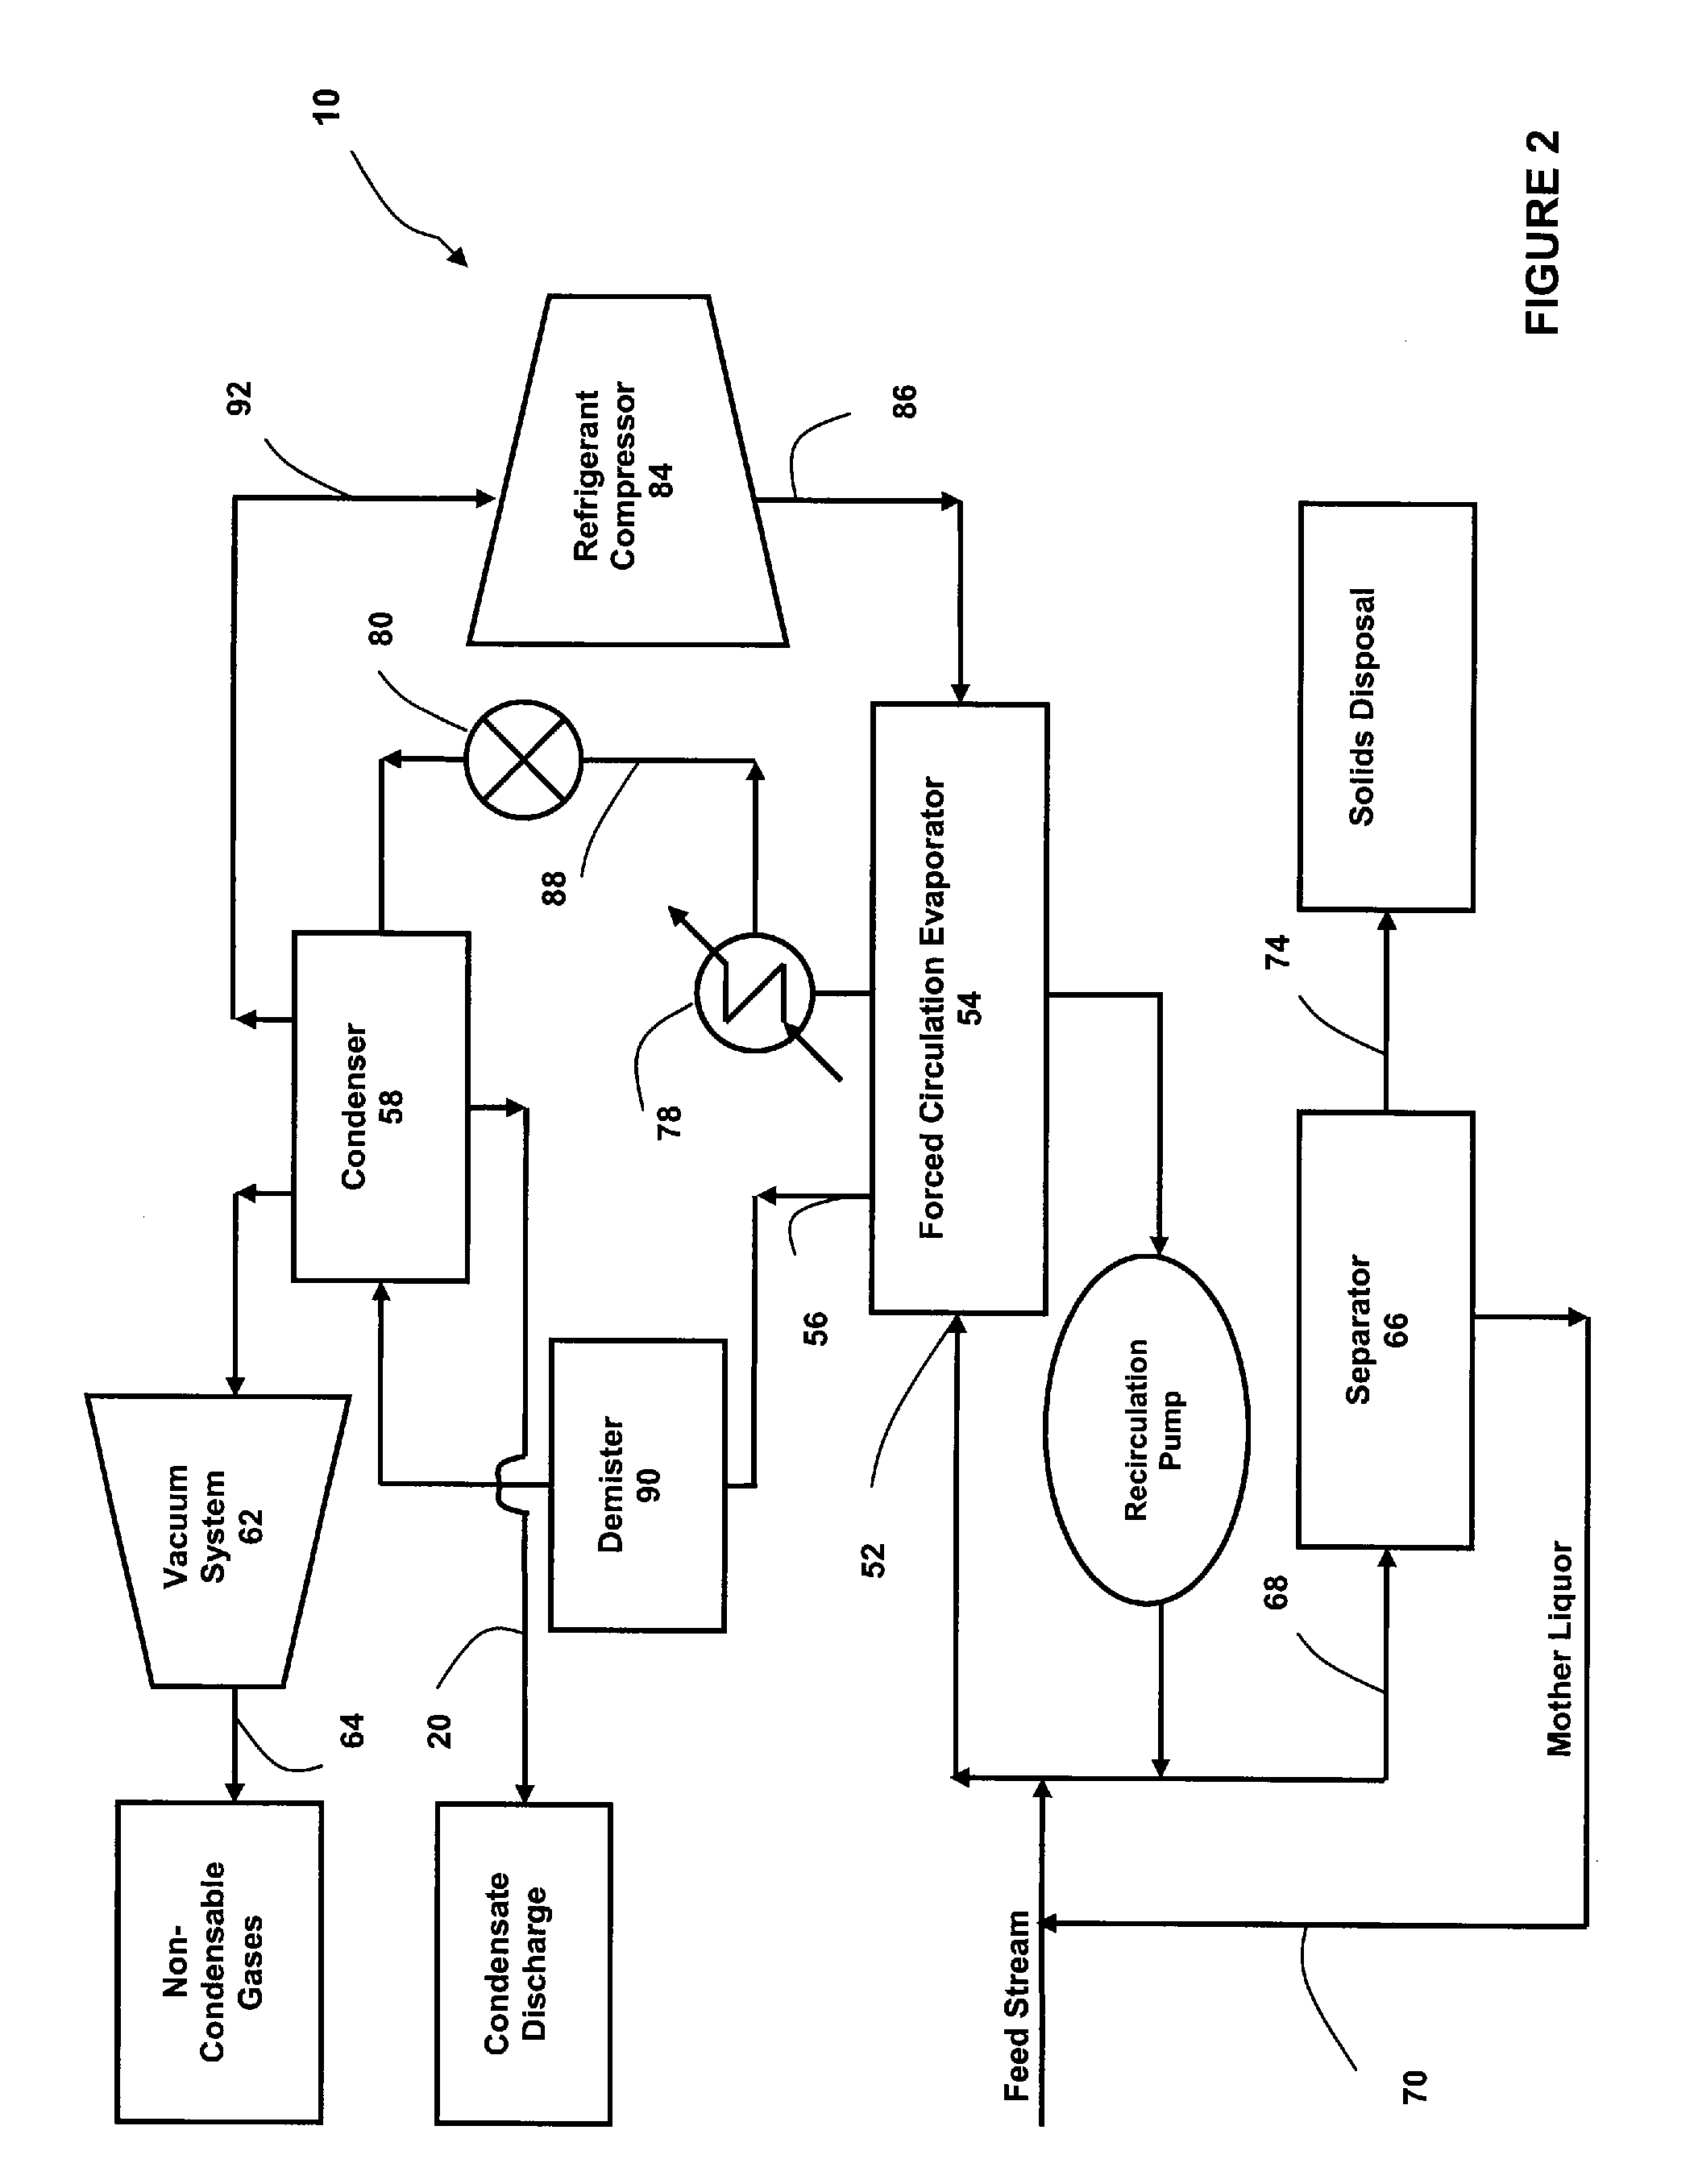 Method for removing dissolved solids from aqueous waste streams